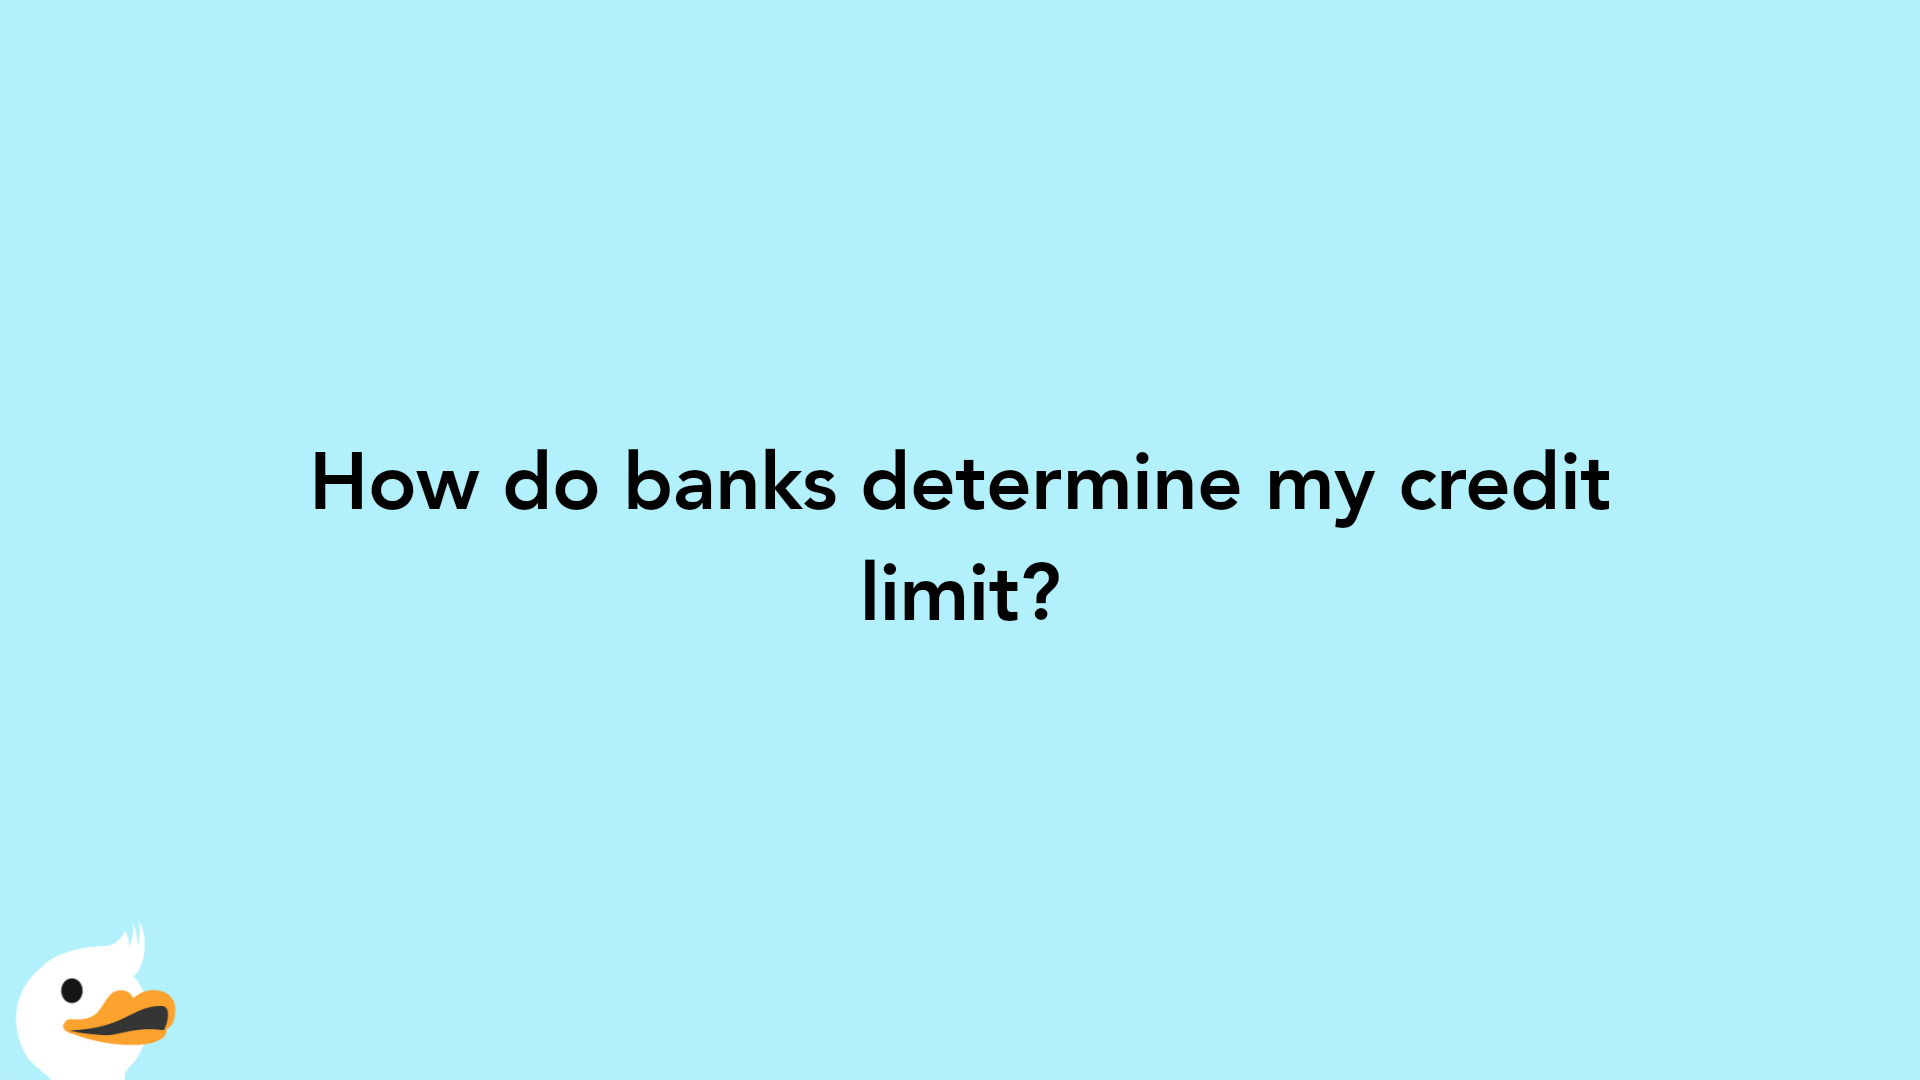 How do banks determine my credit limit?